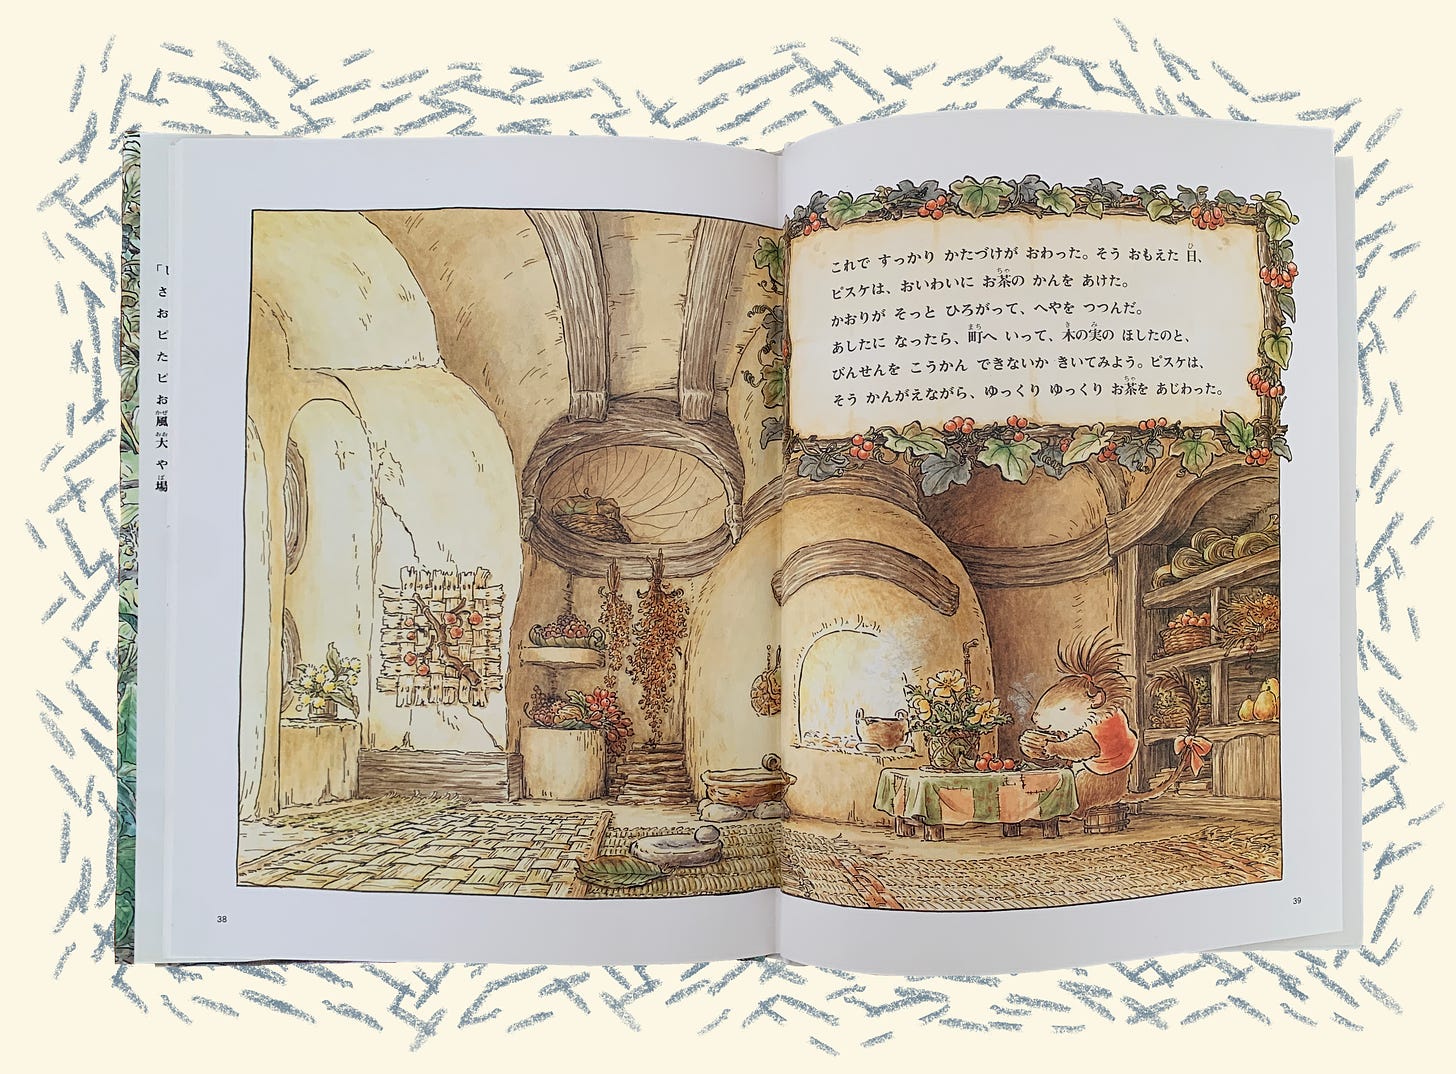 An illustrated page from Little Pisuke's First Adventure. A little squirrel happily sits at a table inside a cave she transformed into her home. The scene is warm, inviting, and detailed.